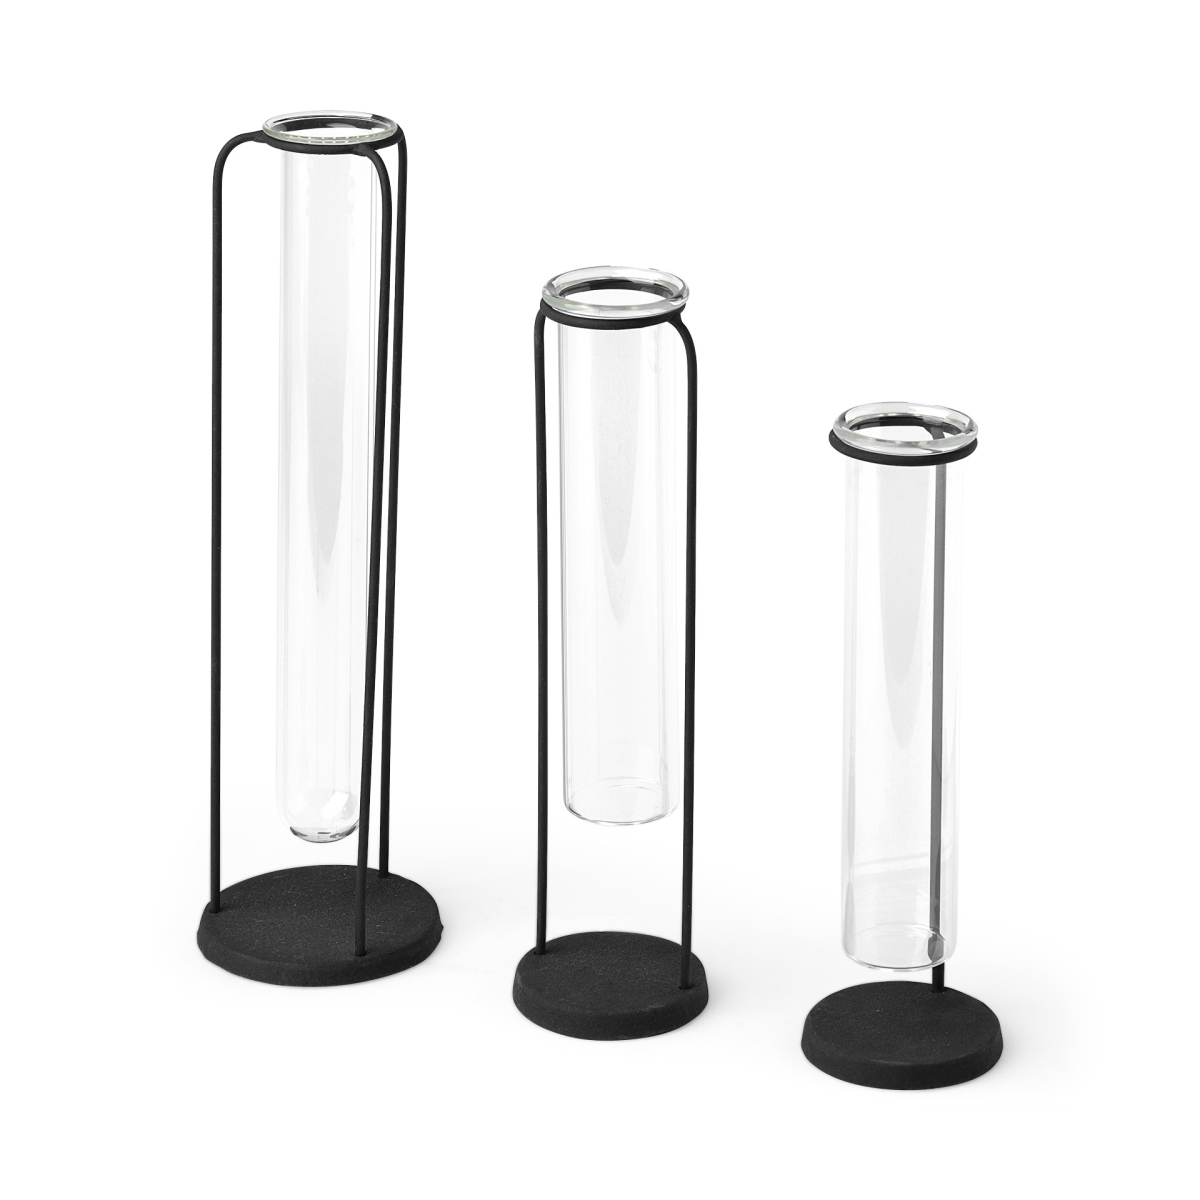 Picture of HomeRoots 397492 11 x 3 x 3 in. Black Test Tube Stand Vases